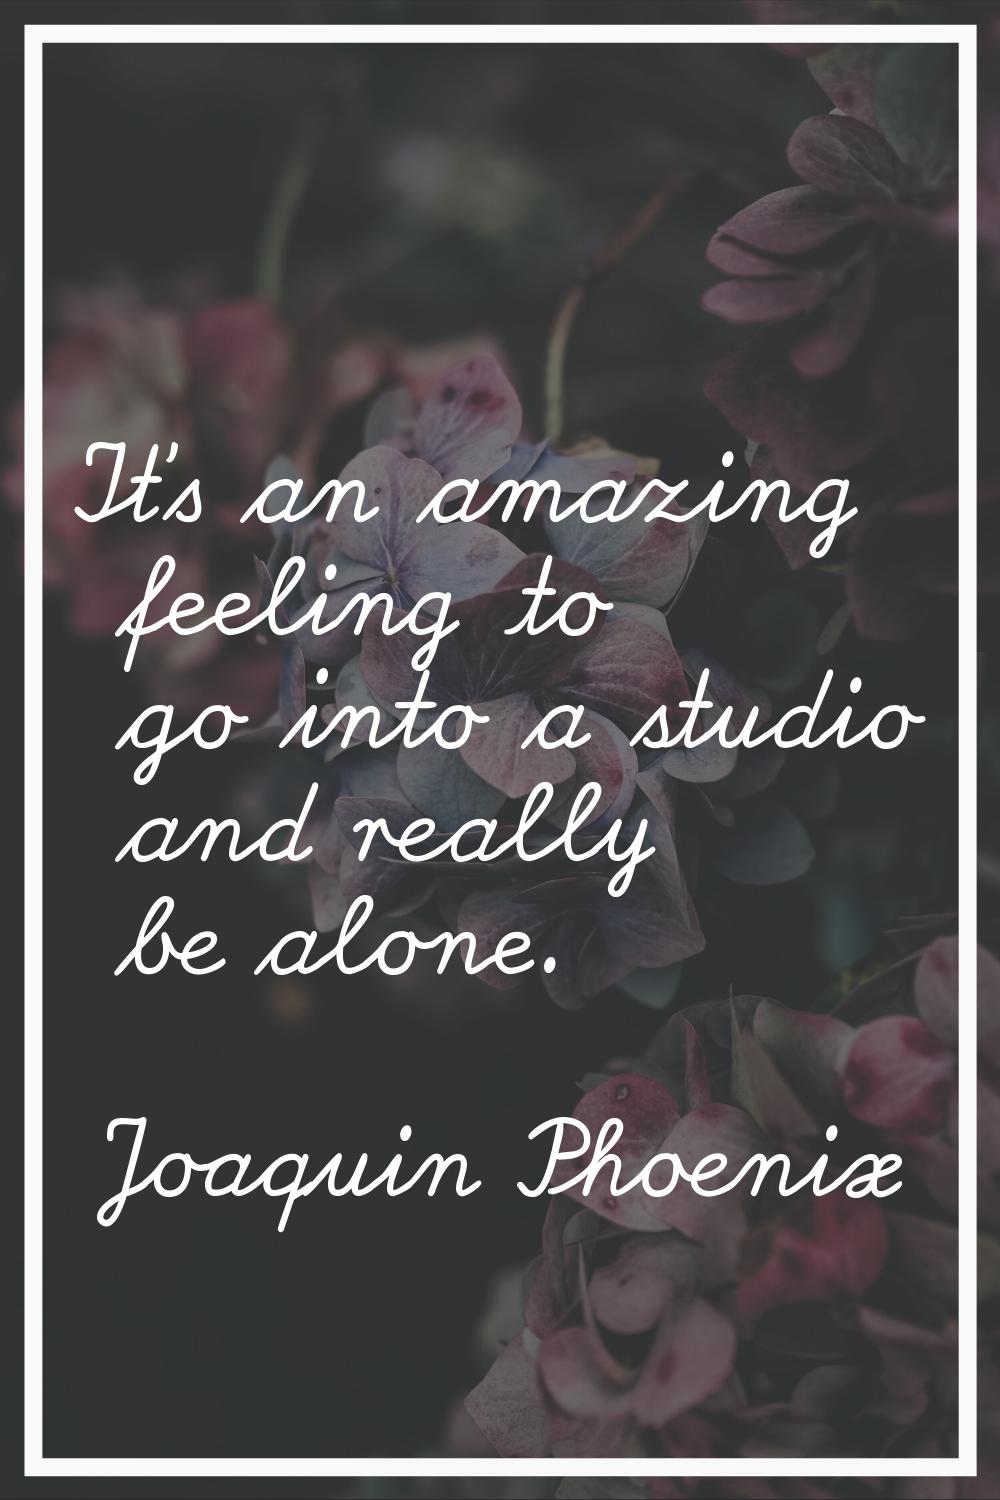 It's an amazing feeling to go into a studio and really be alone.